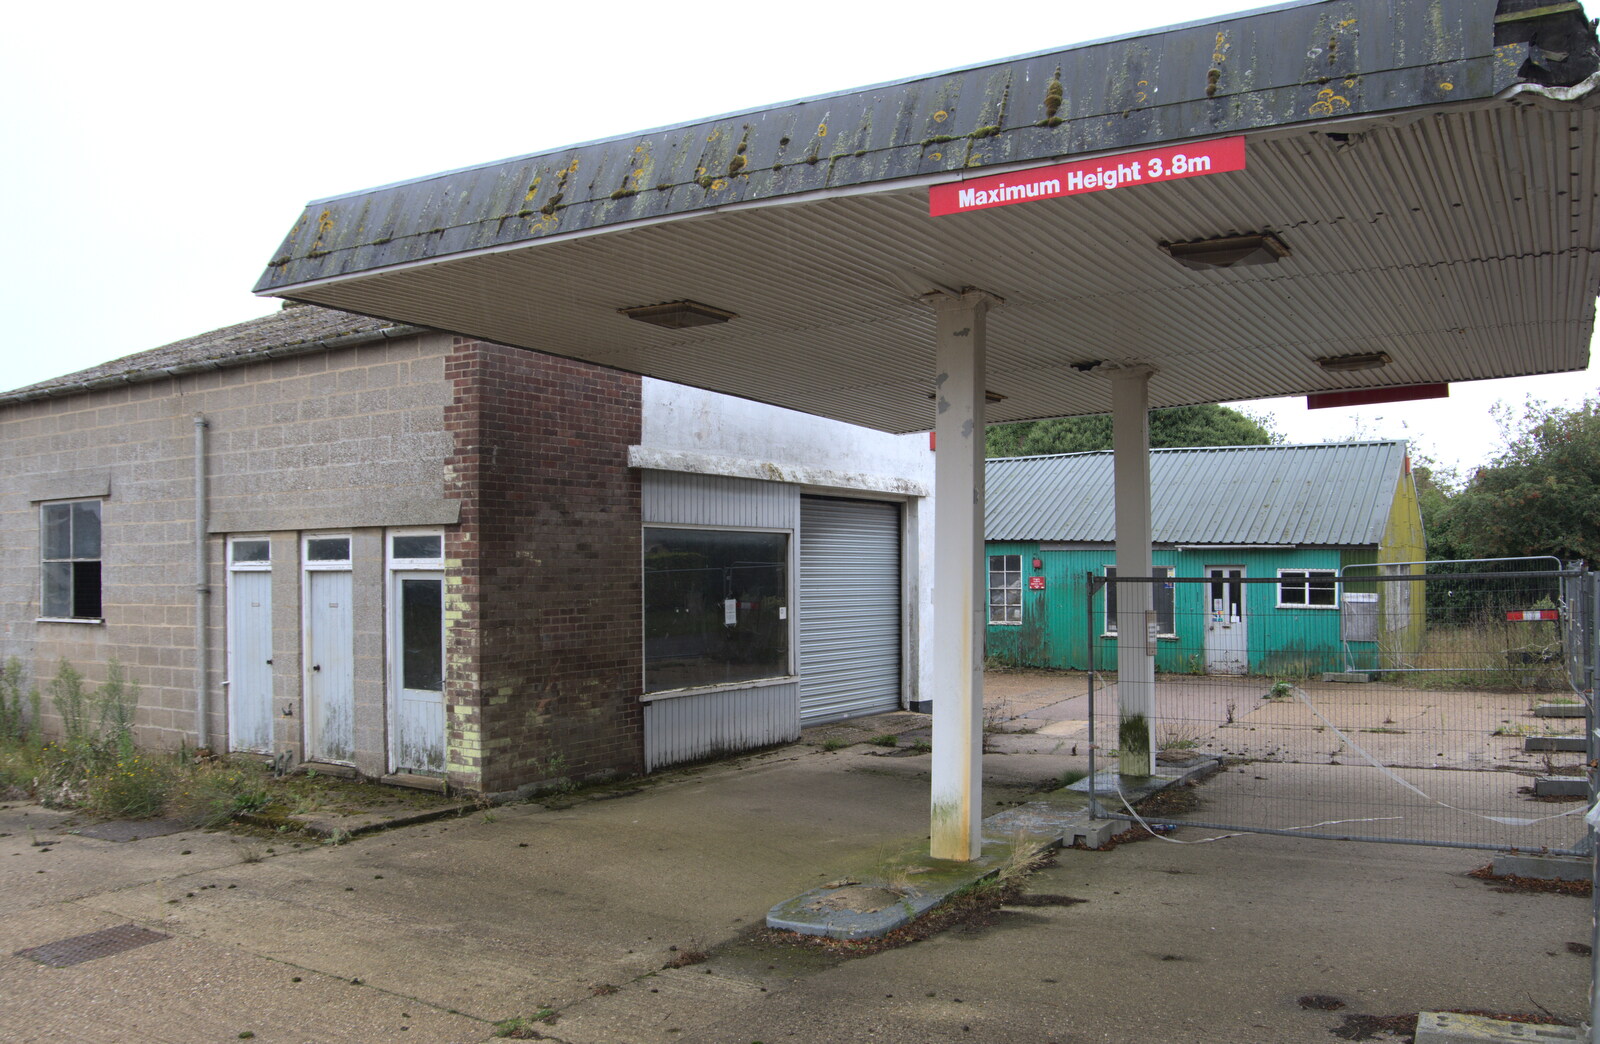 The derelict petrol station from A Trip to Orford, Suffolk - 29th August 2020